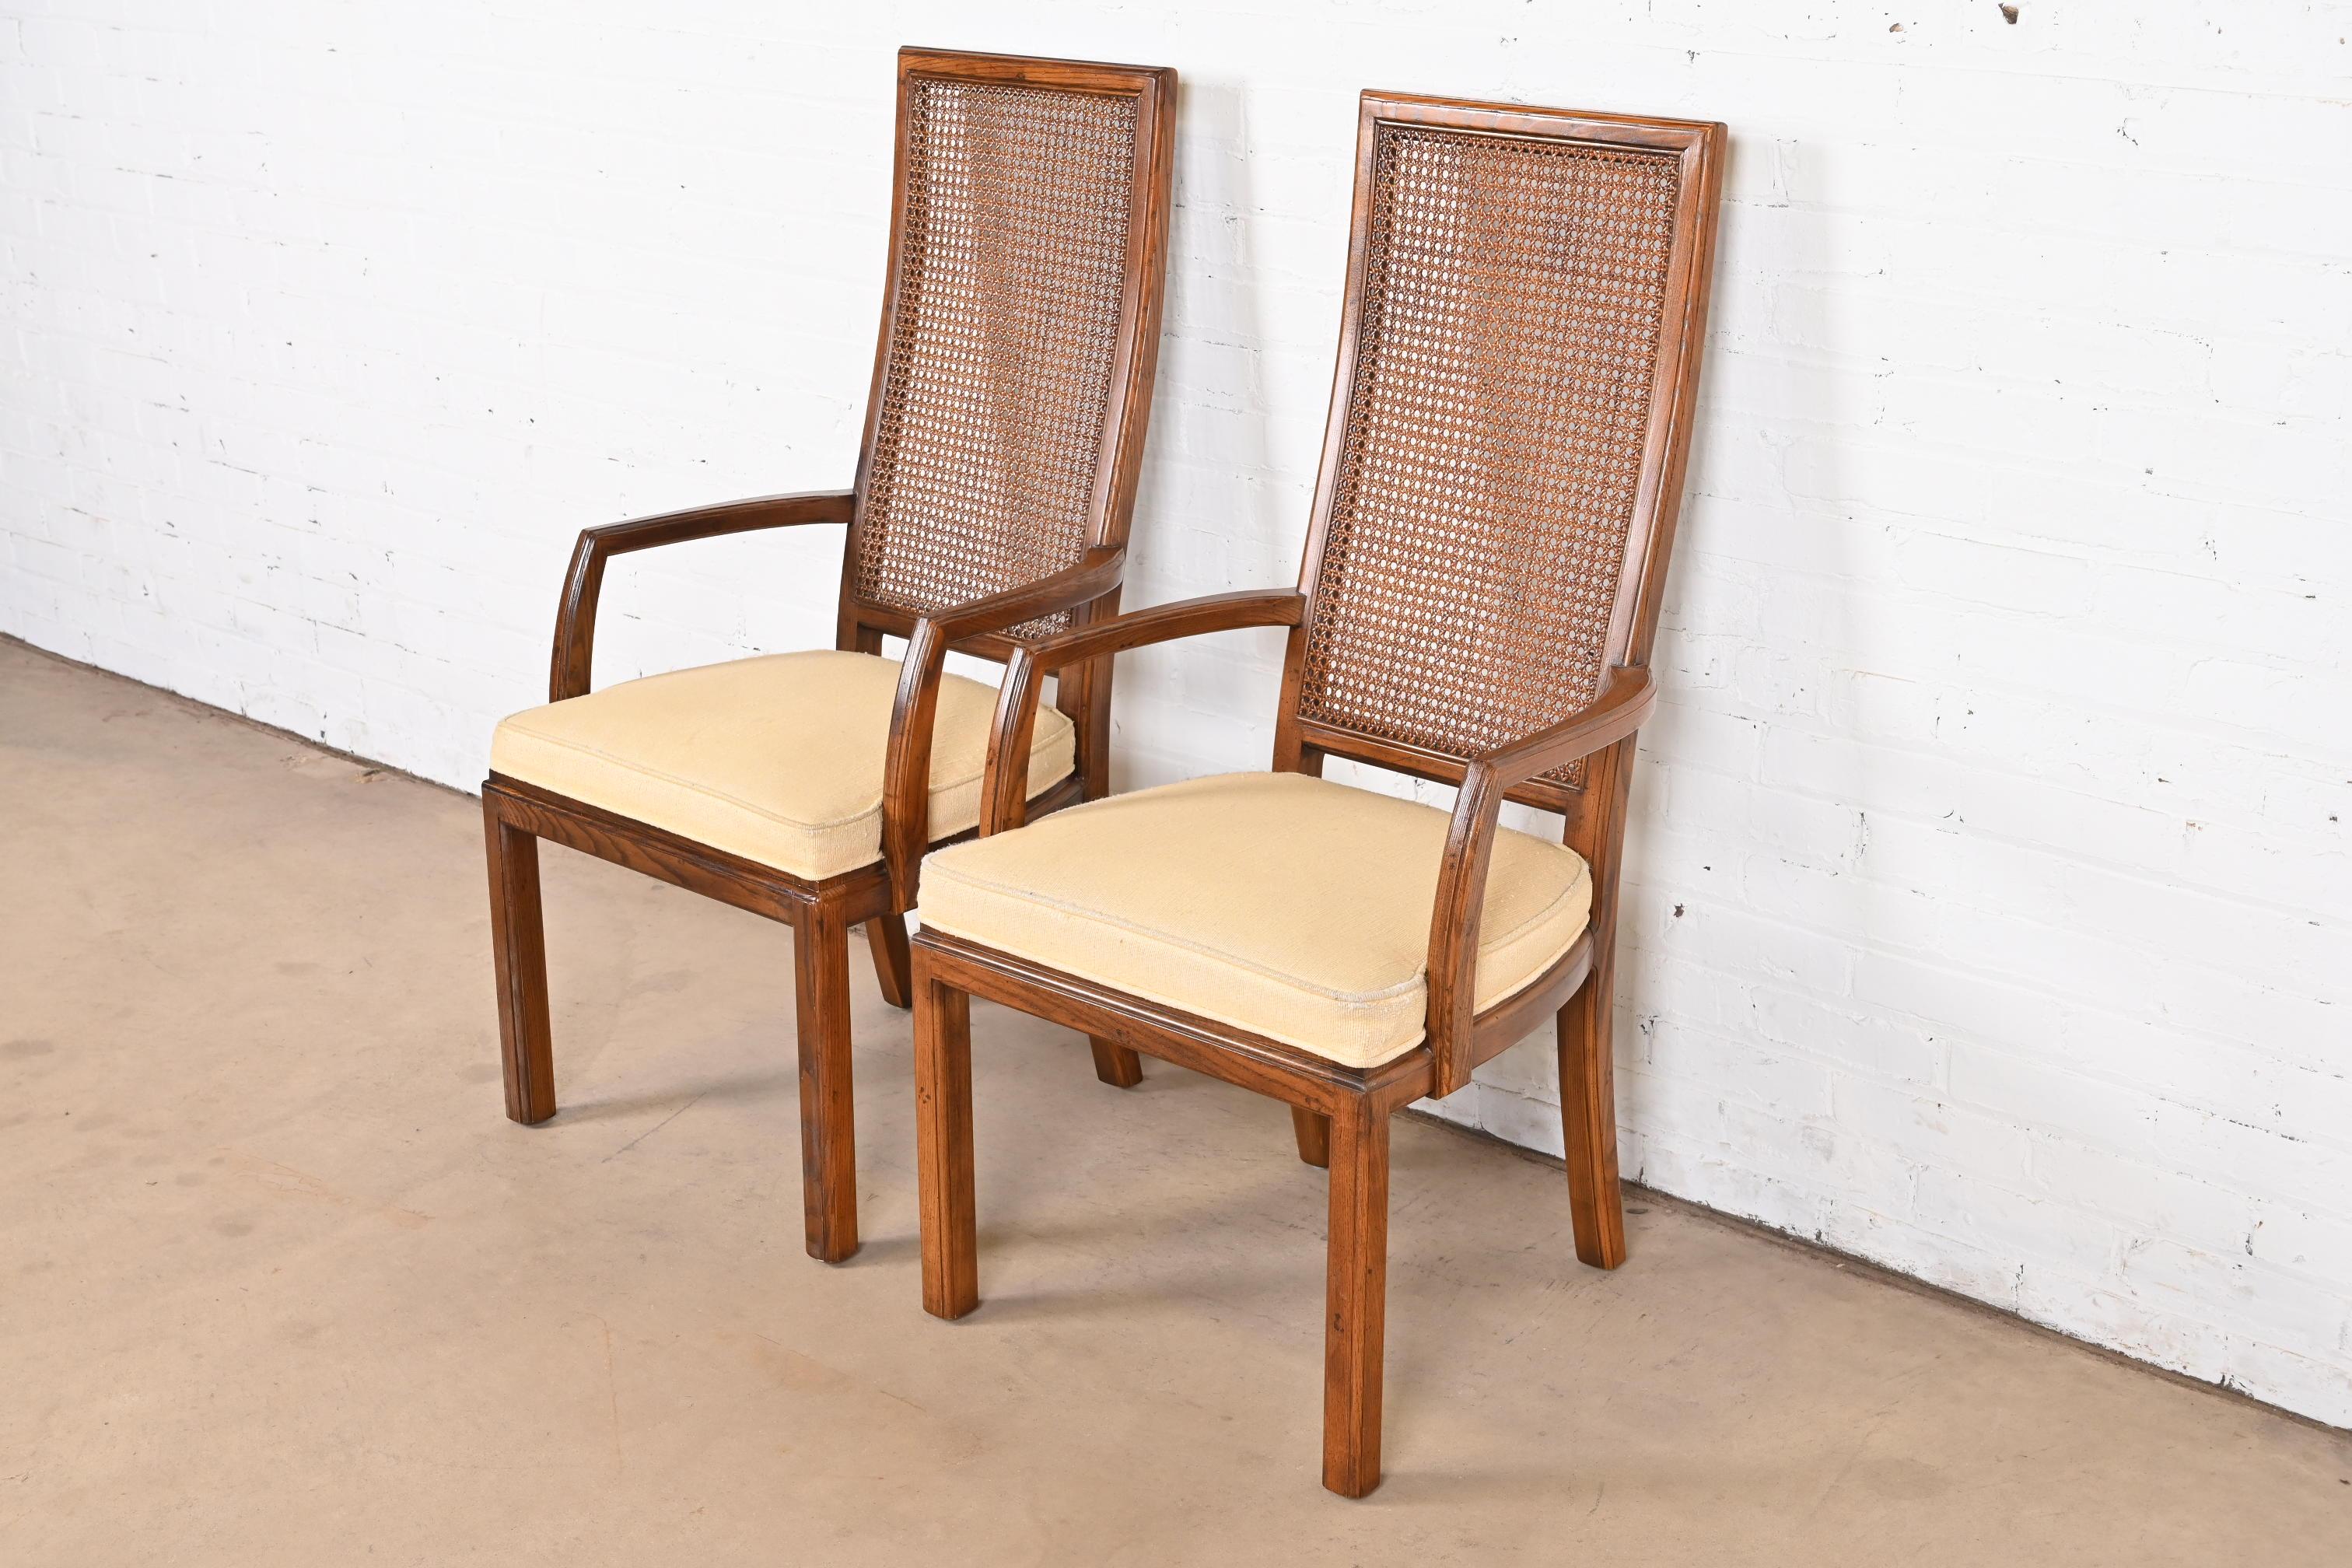 Henredon Mid-Century Modern Oak and Cane High Back Dining Arm Chairs, Pair In Good Condition For Sale In South Bend, IN